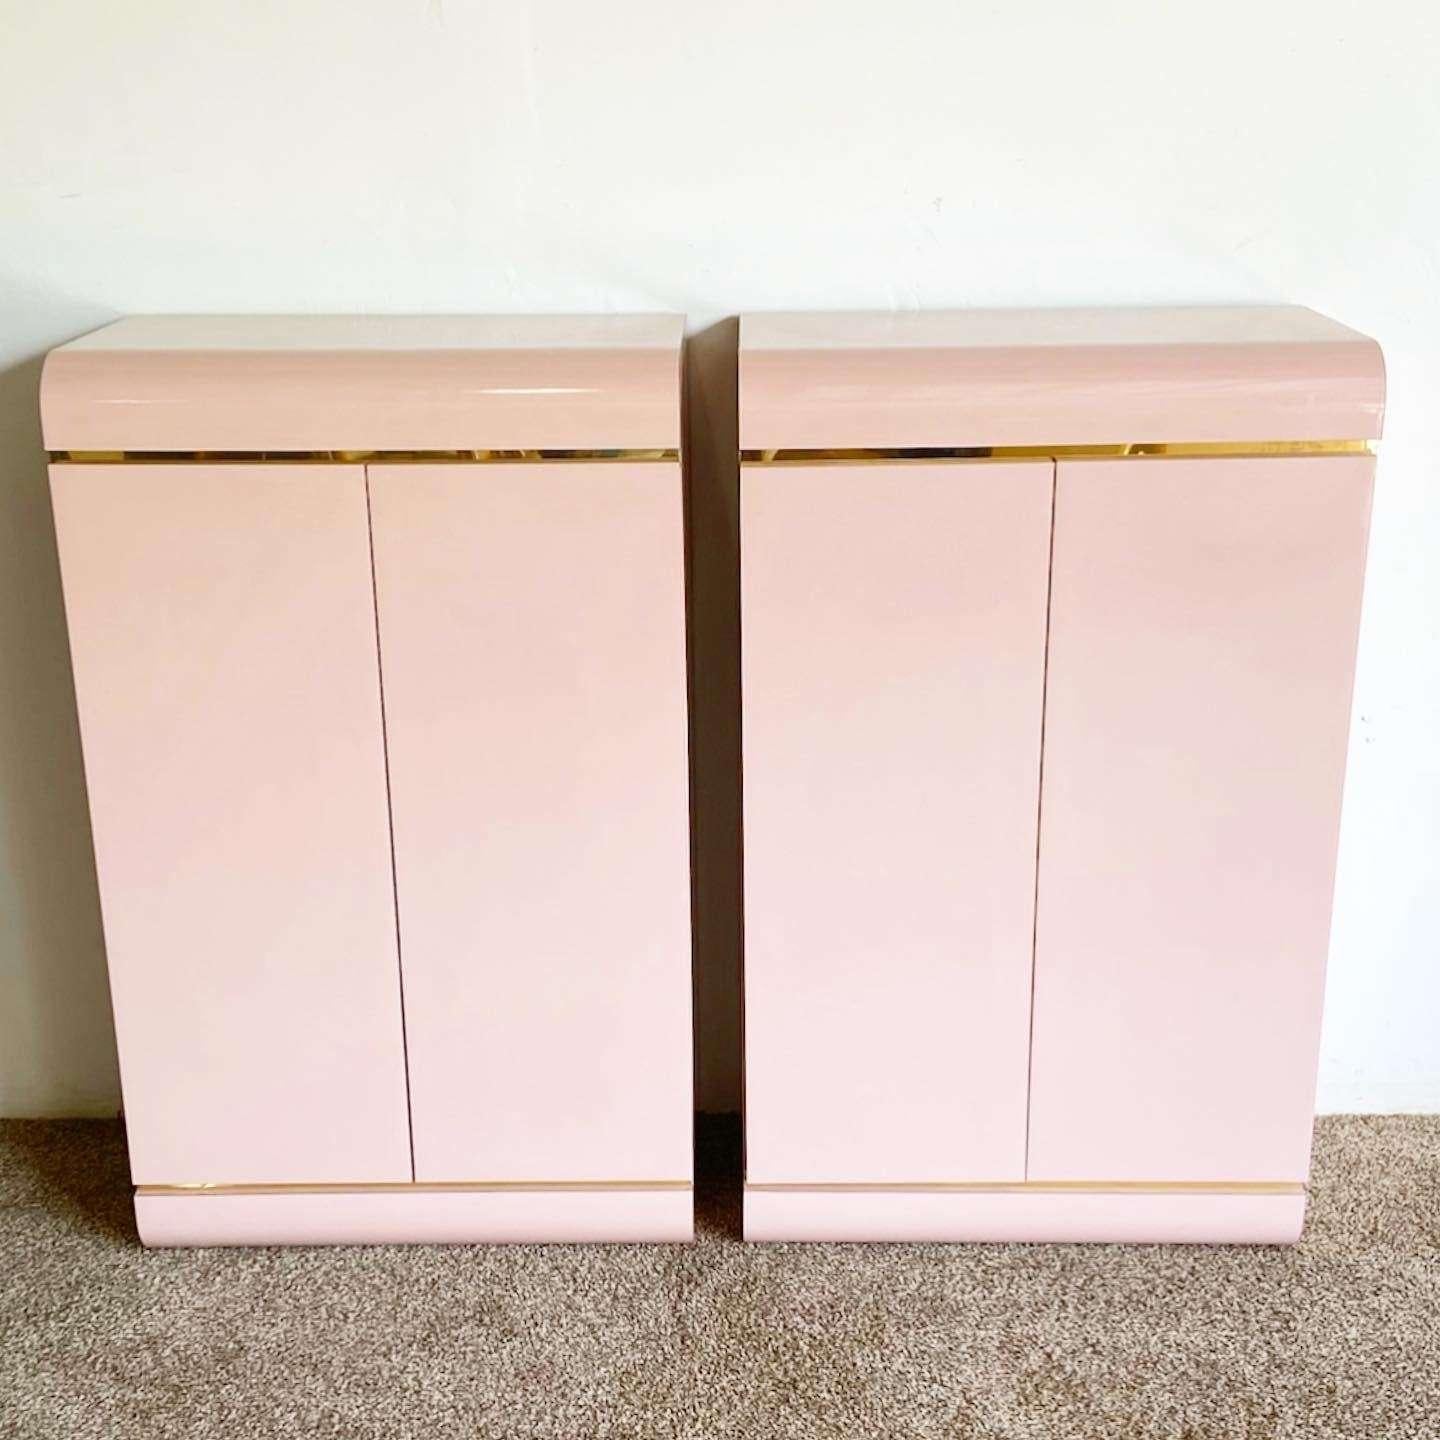 Amazing vintage postmodern pair of waterfall cabinets. Each feature a pink lacquer laminate with gold accent.
